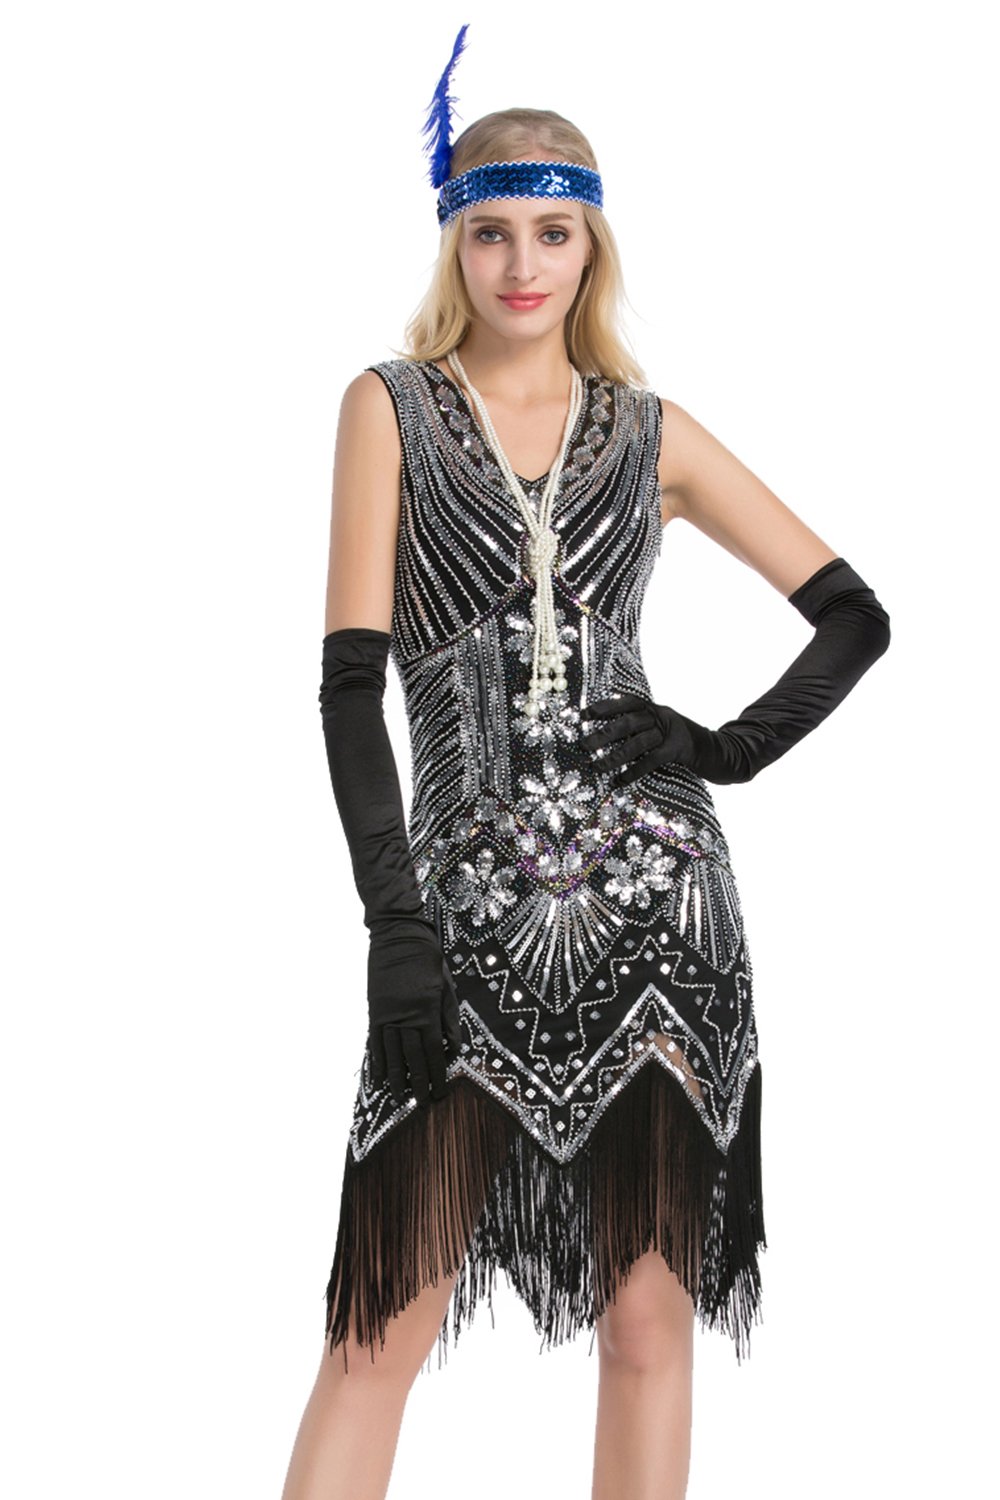 1920s Gatsby Look Vintage Flapper Swing Fringe Cocktail Evening Party Dress 4-20